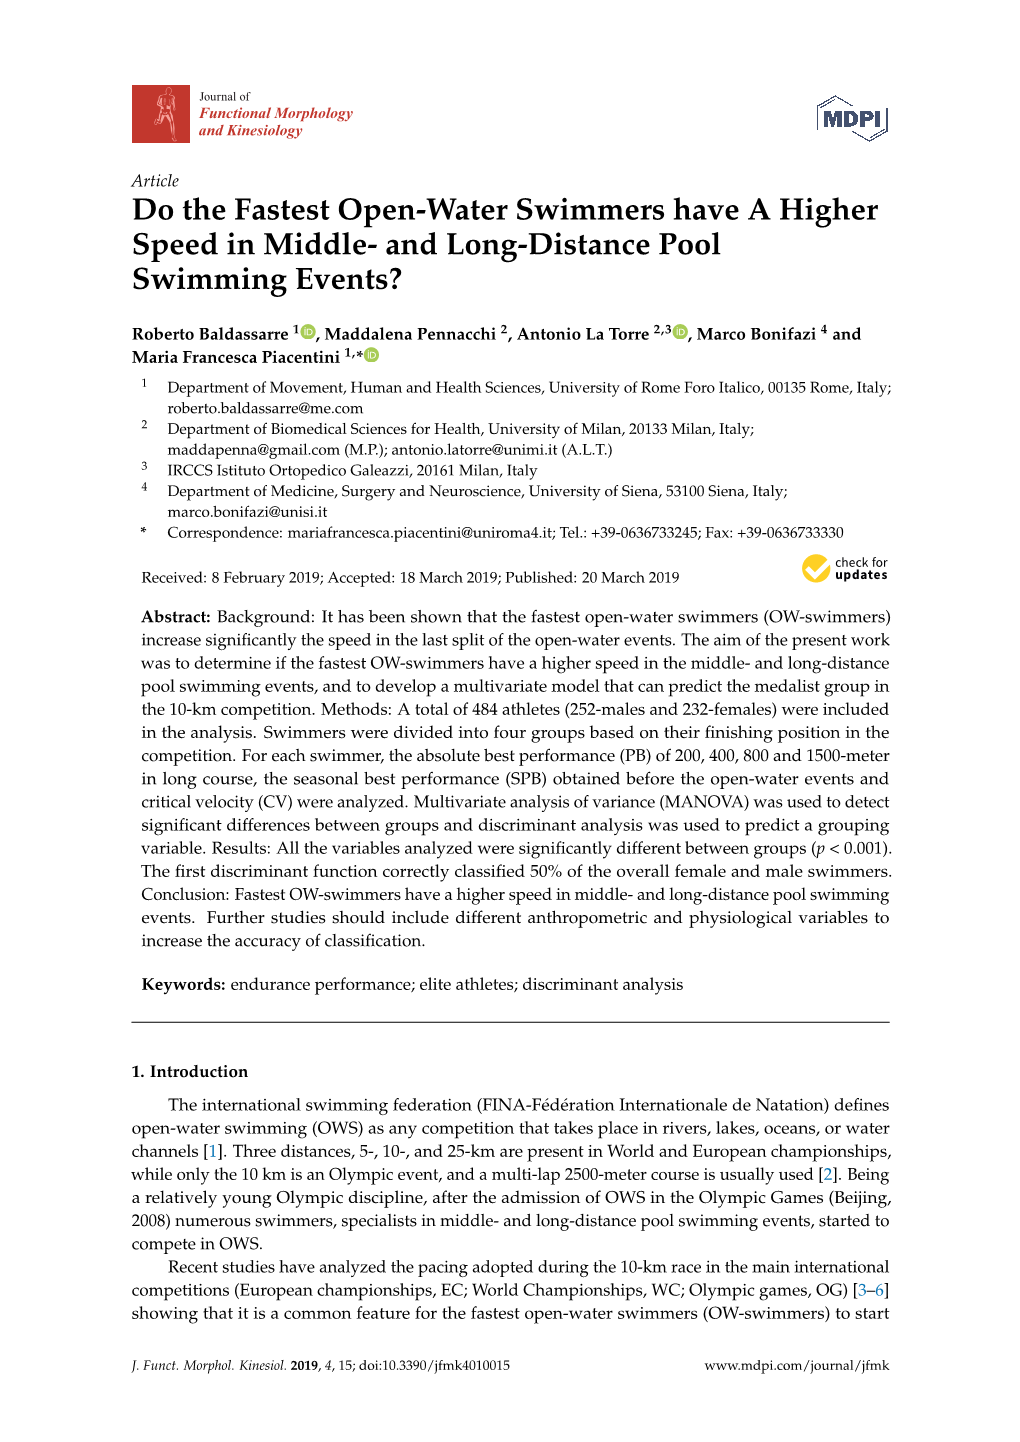 Do the Fastest Open-Water Swimmers Have a Higher Speed in Middle- and Long-Distance Pool Swimming Events?